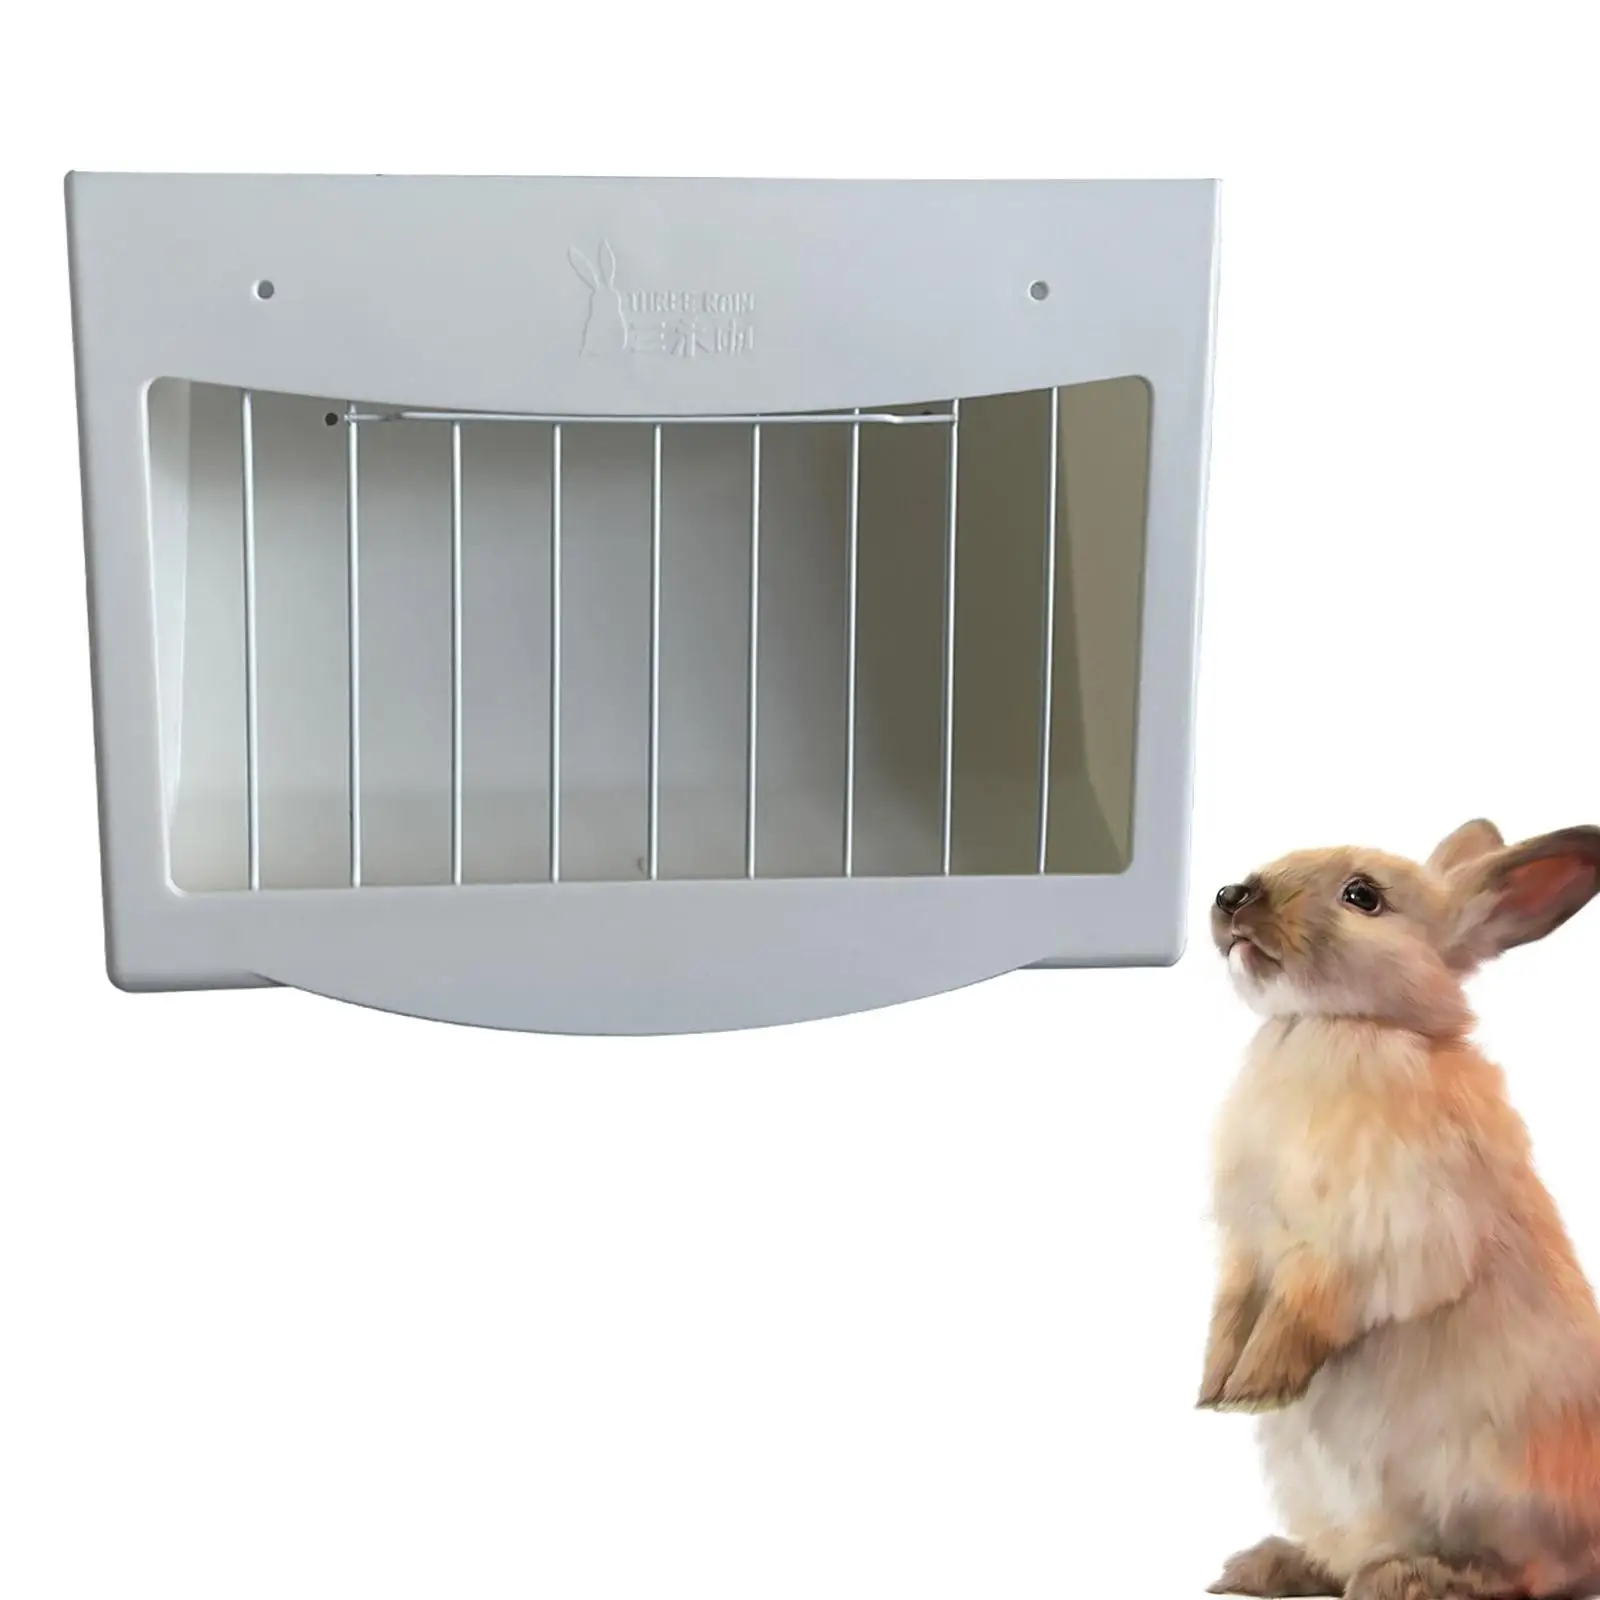 

Rabbit Feeder Portable Dispenser Pets Accessories with Hooks Rabbit Hay Rack for Small Animals Guinea Pig Rabbits Hamster Bunny